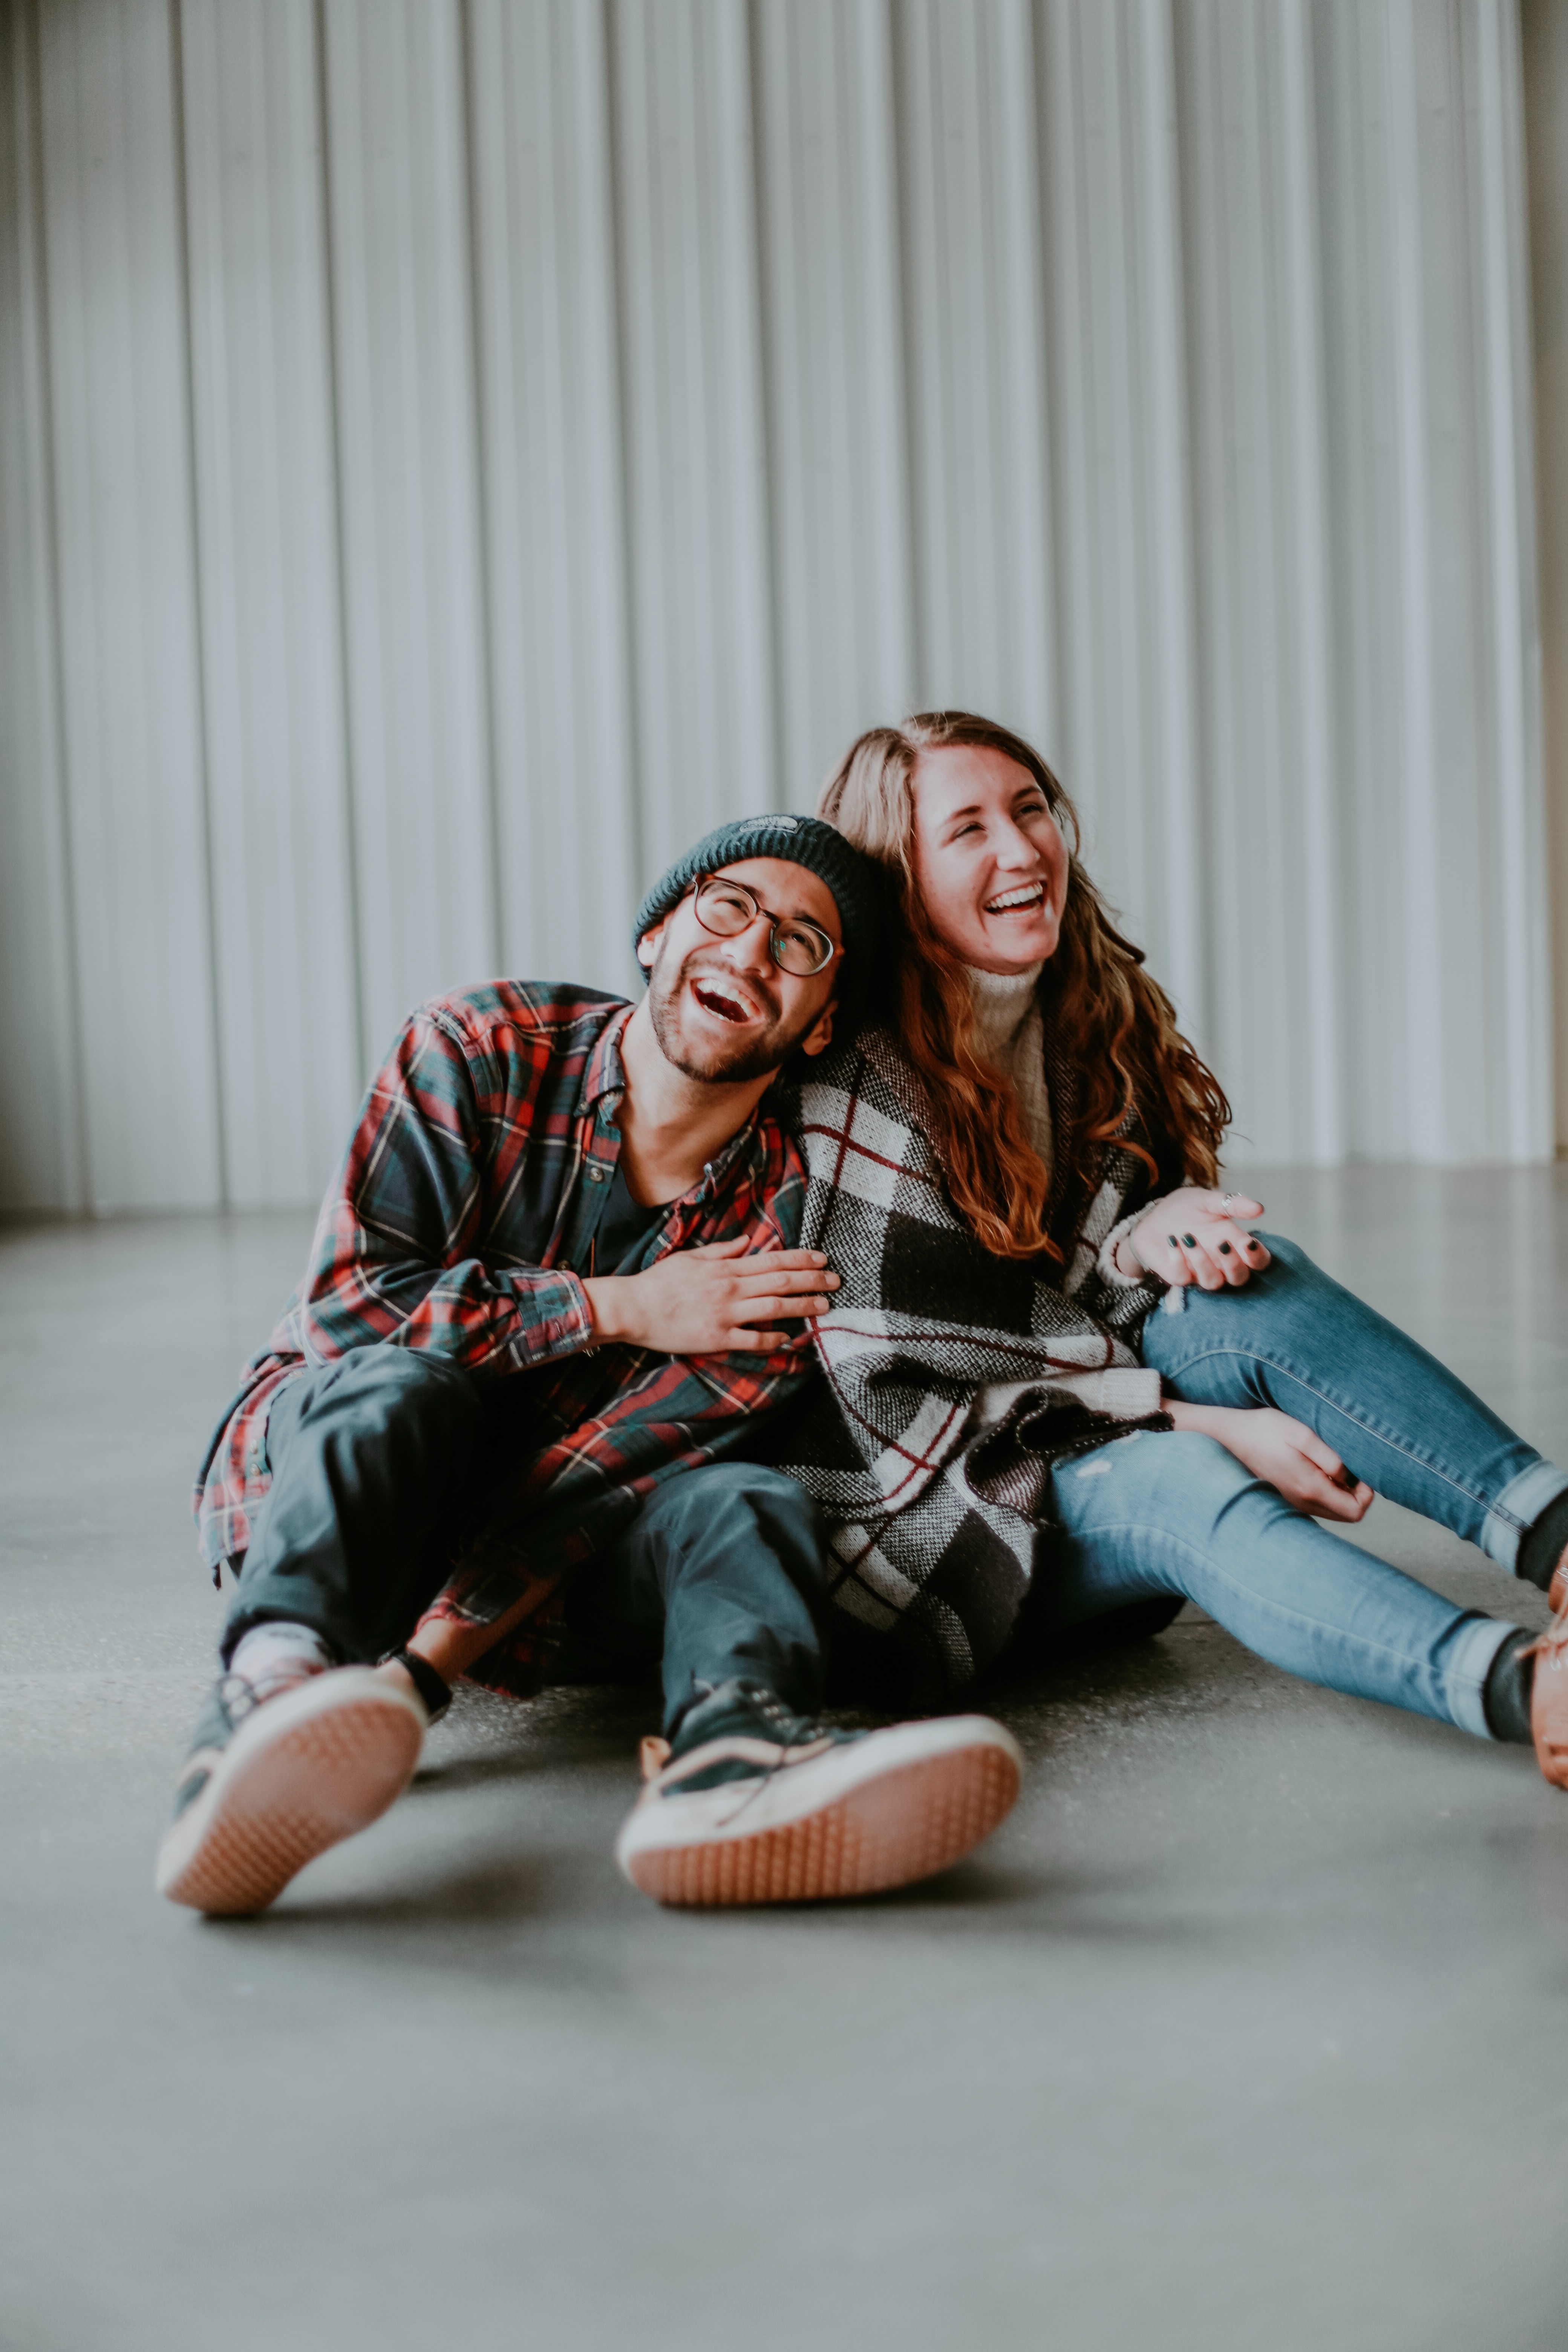 Laughter in all forms is a huge antidote to stress and burnout! Photo by Sarah Noltner on Unsplash.